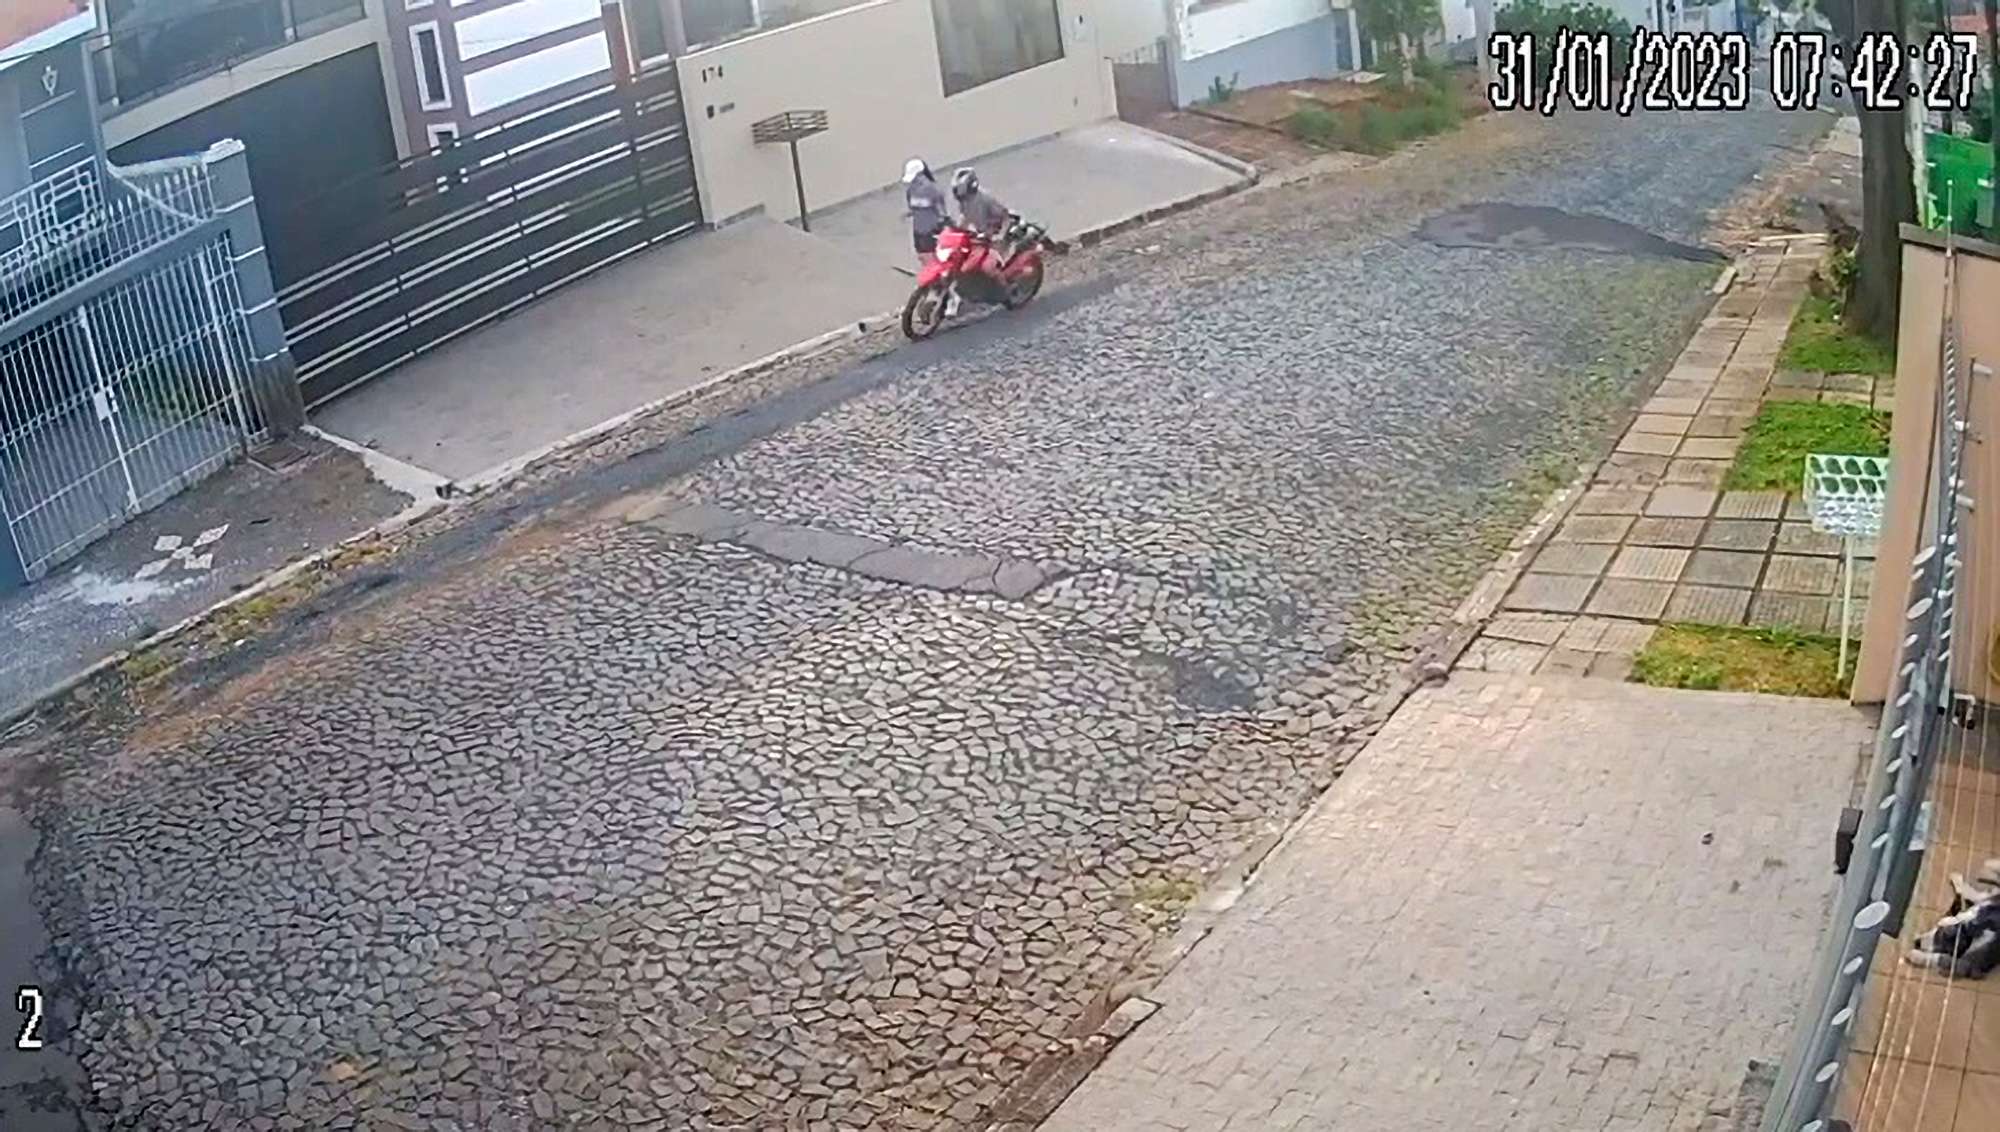 Read more about the article INSTANT KARMA: Bungling Perv Crashes After Groping Woman From Motorbike